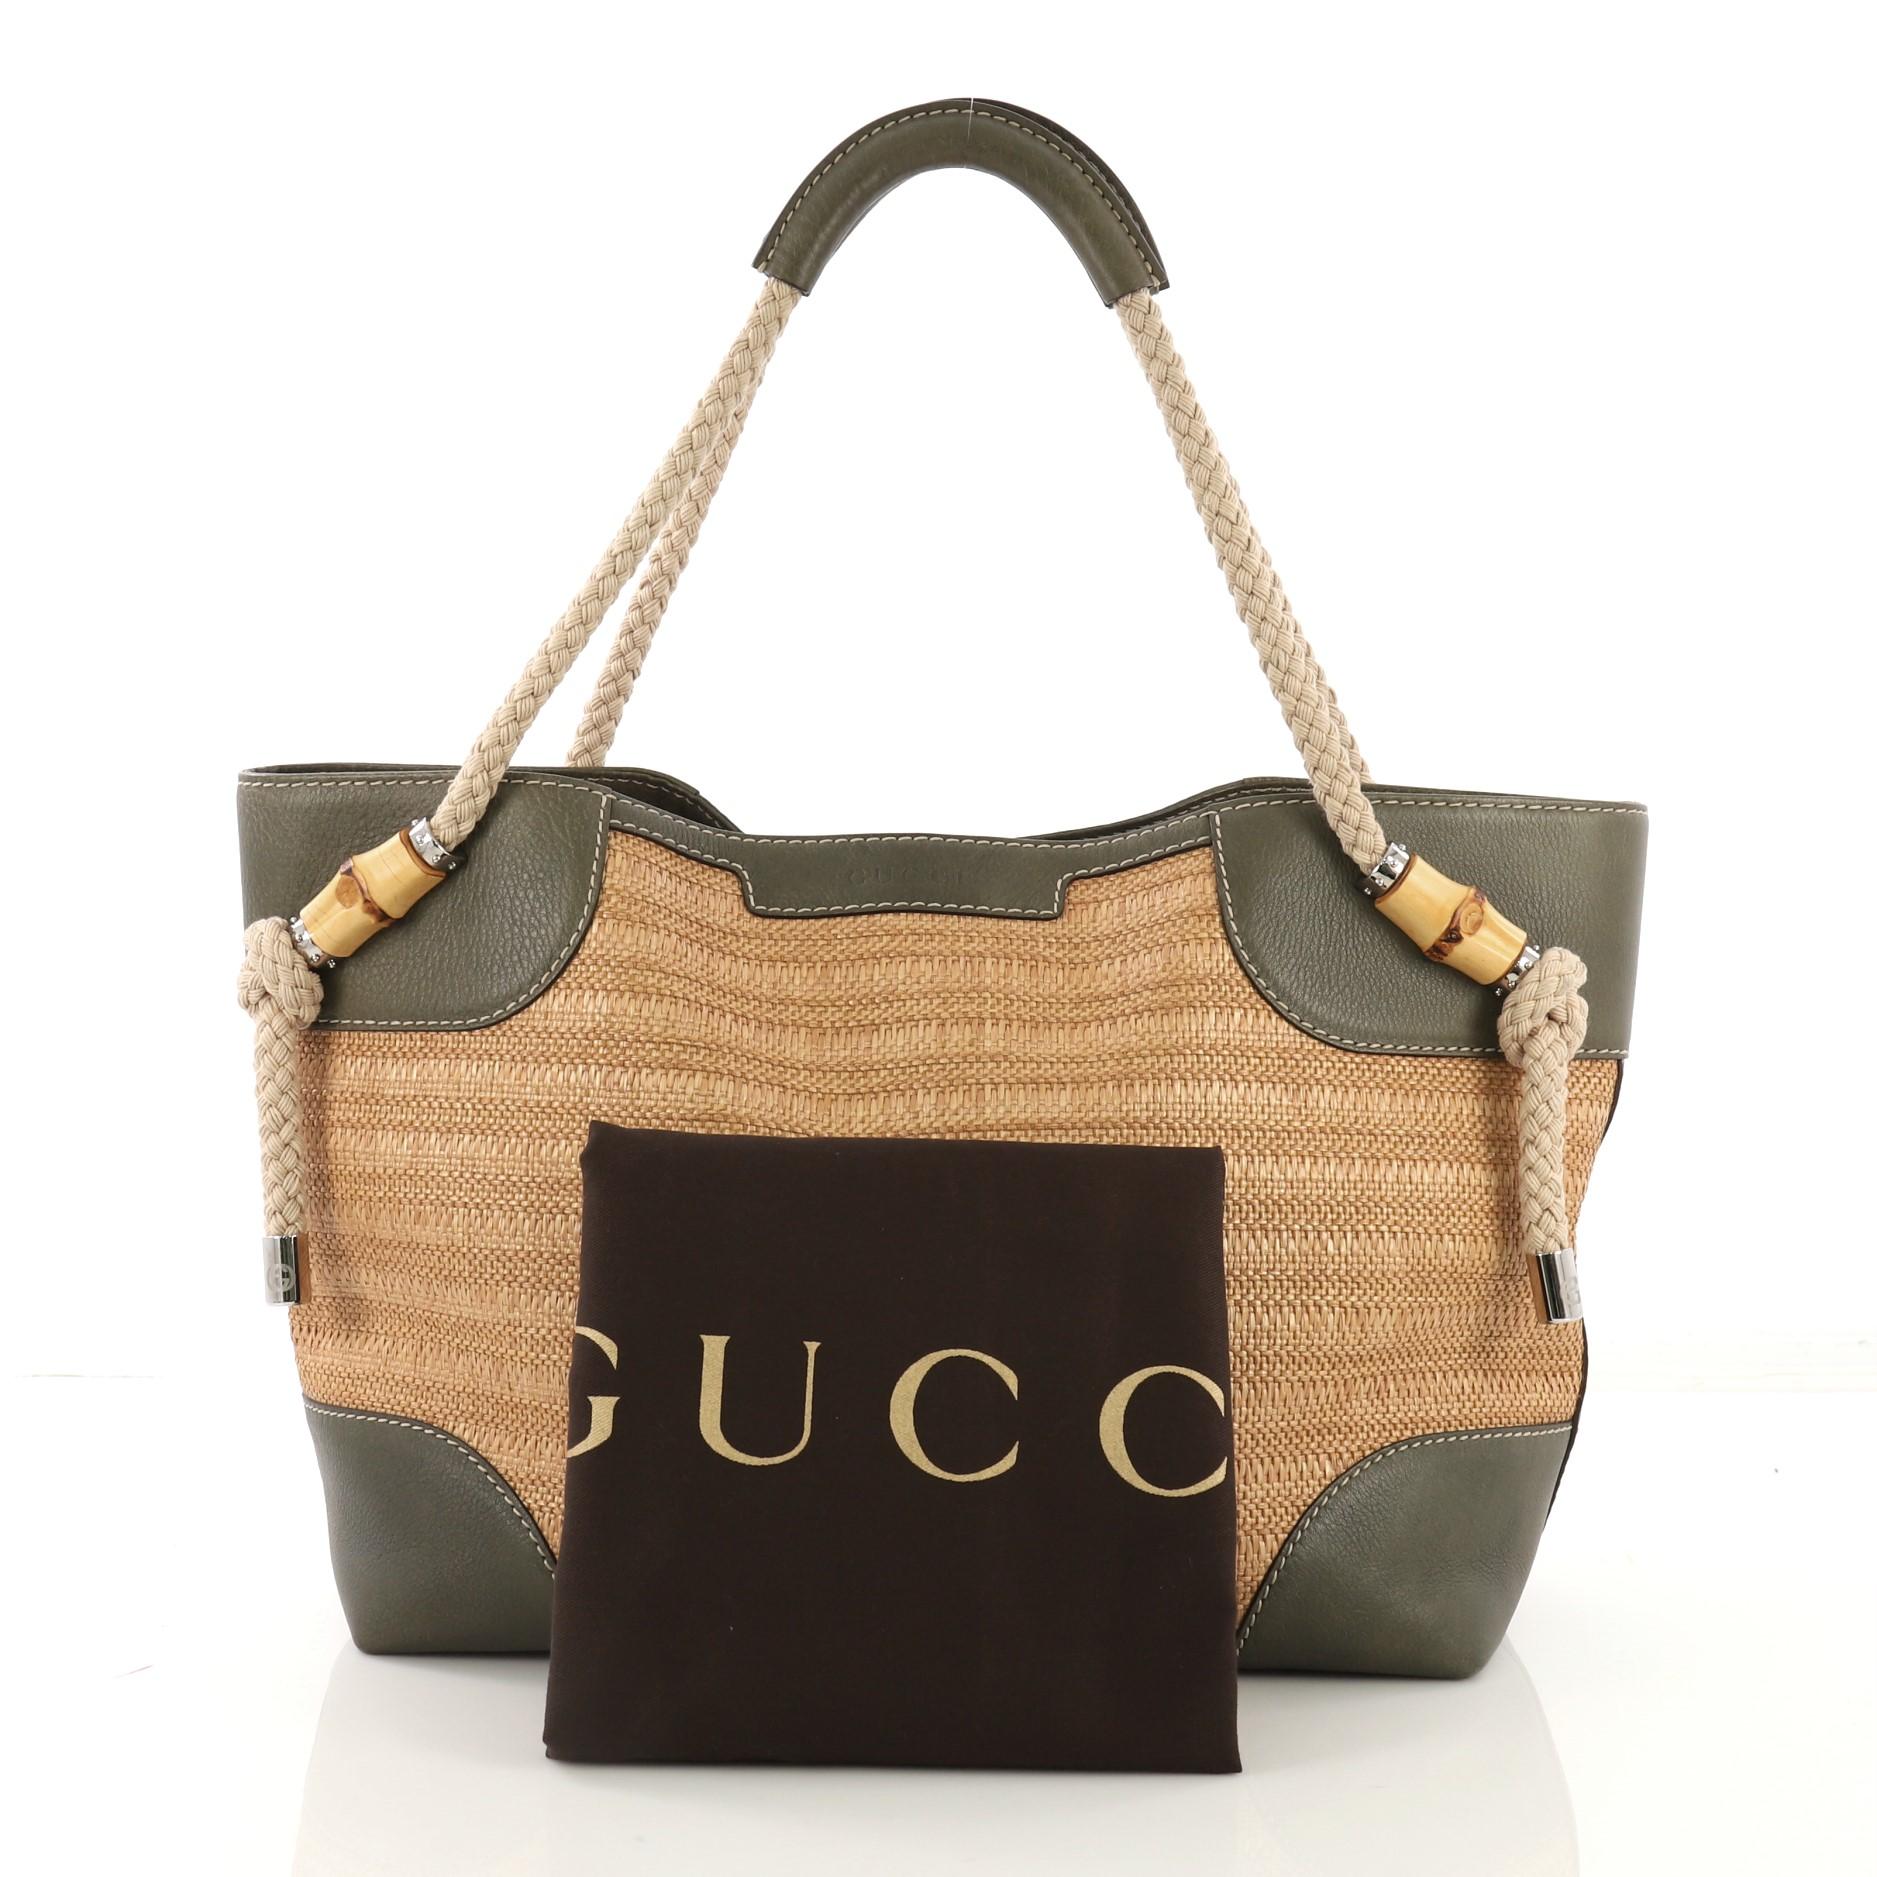 This Gucci Maui Tote Woven Straw Medium, crafted from brown woven straw and green leather, features dual rope strap, leather trim, and silver-tone hardware. It opens to a beige fabric interior with side zip and slip pockets. 

Estimated Retail